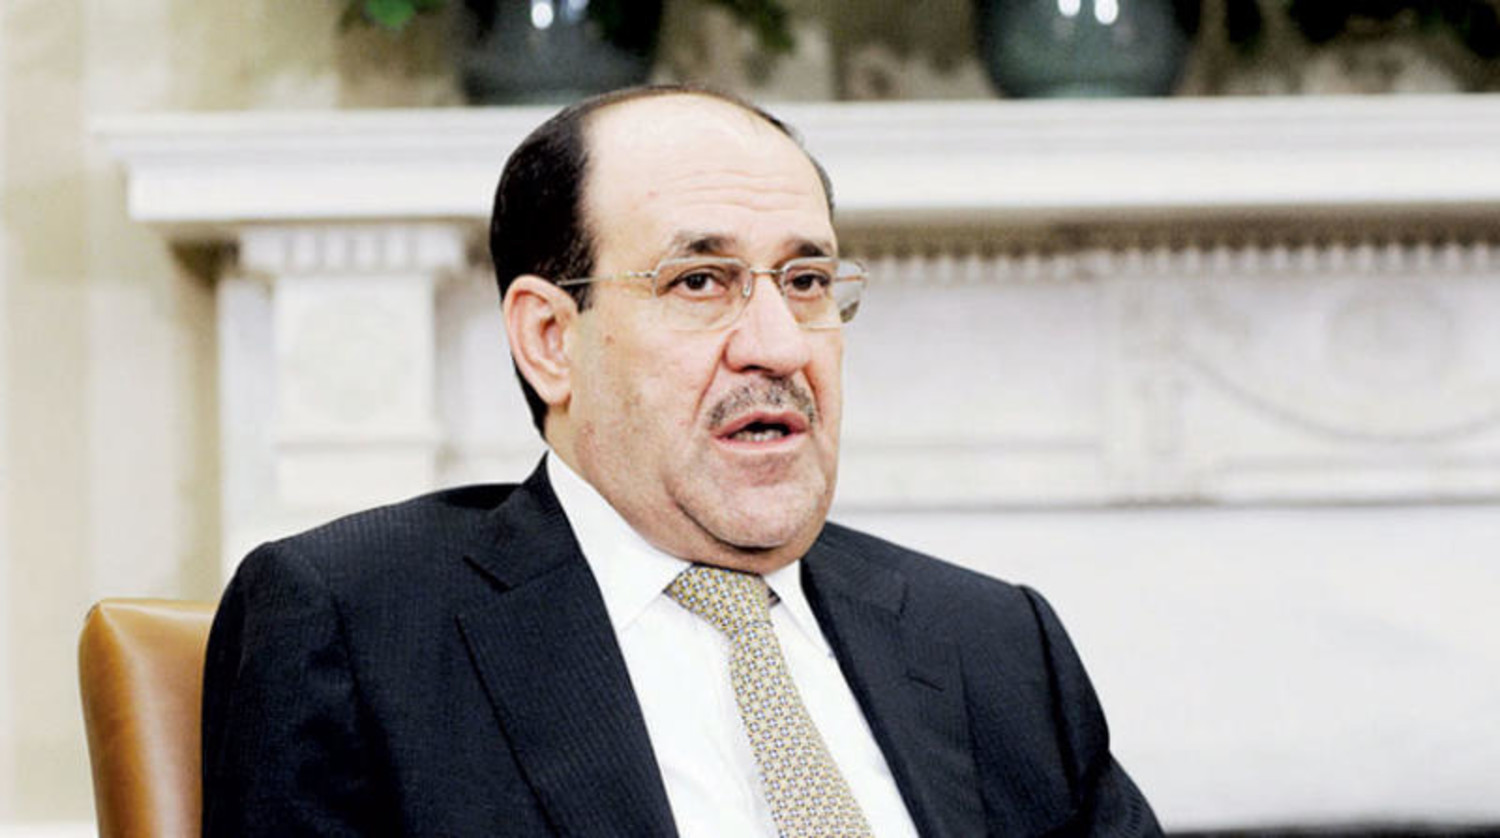 Al-Maliki supports recent Palestinian operation against Israel